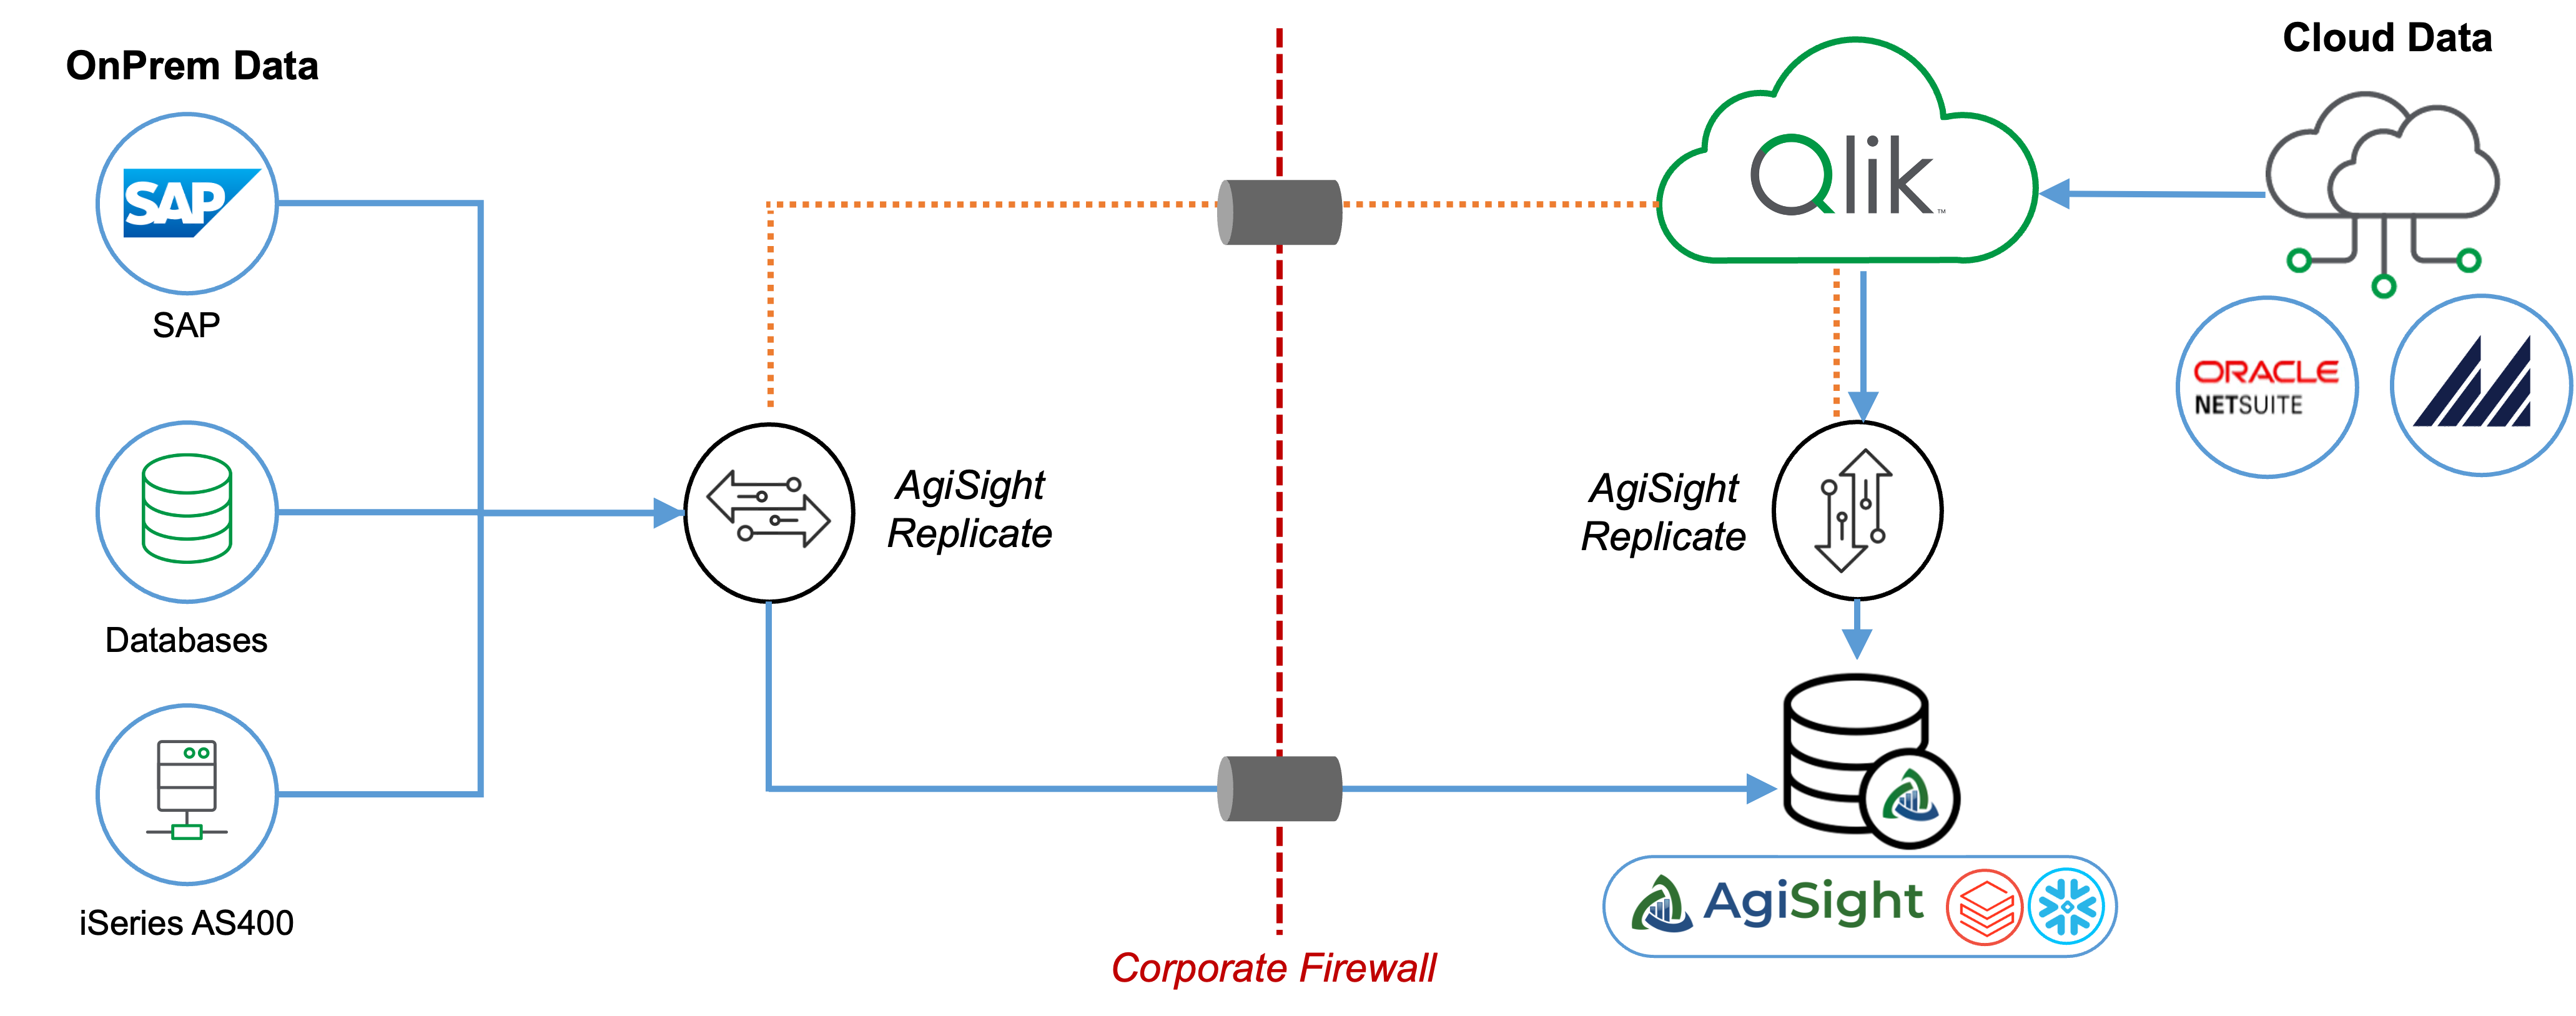 Graphic showing how data is replicated and moved within the AgiSight Platform